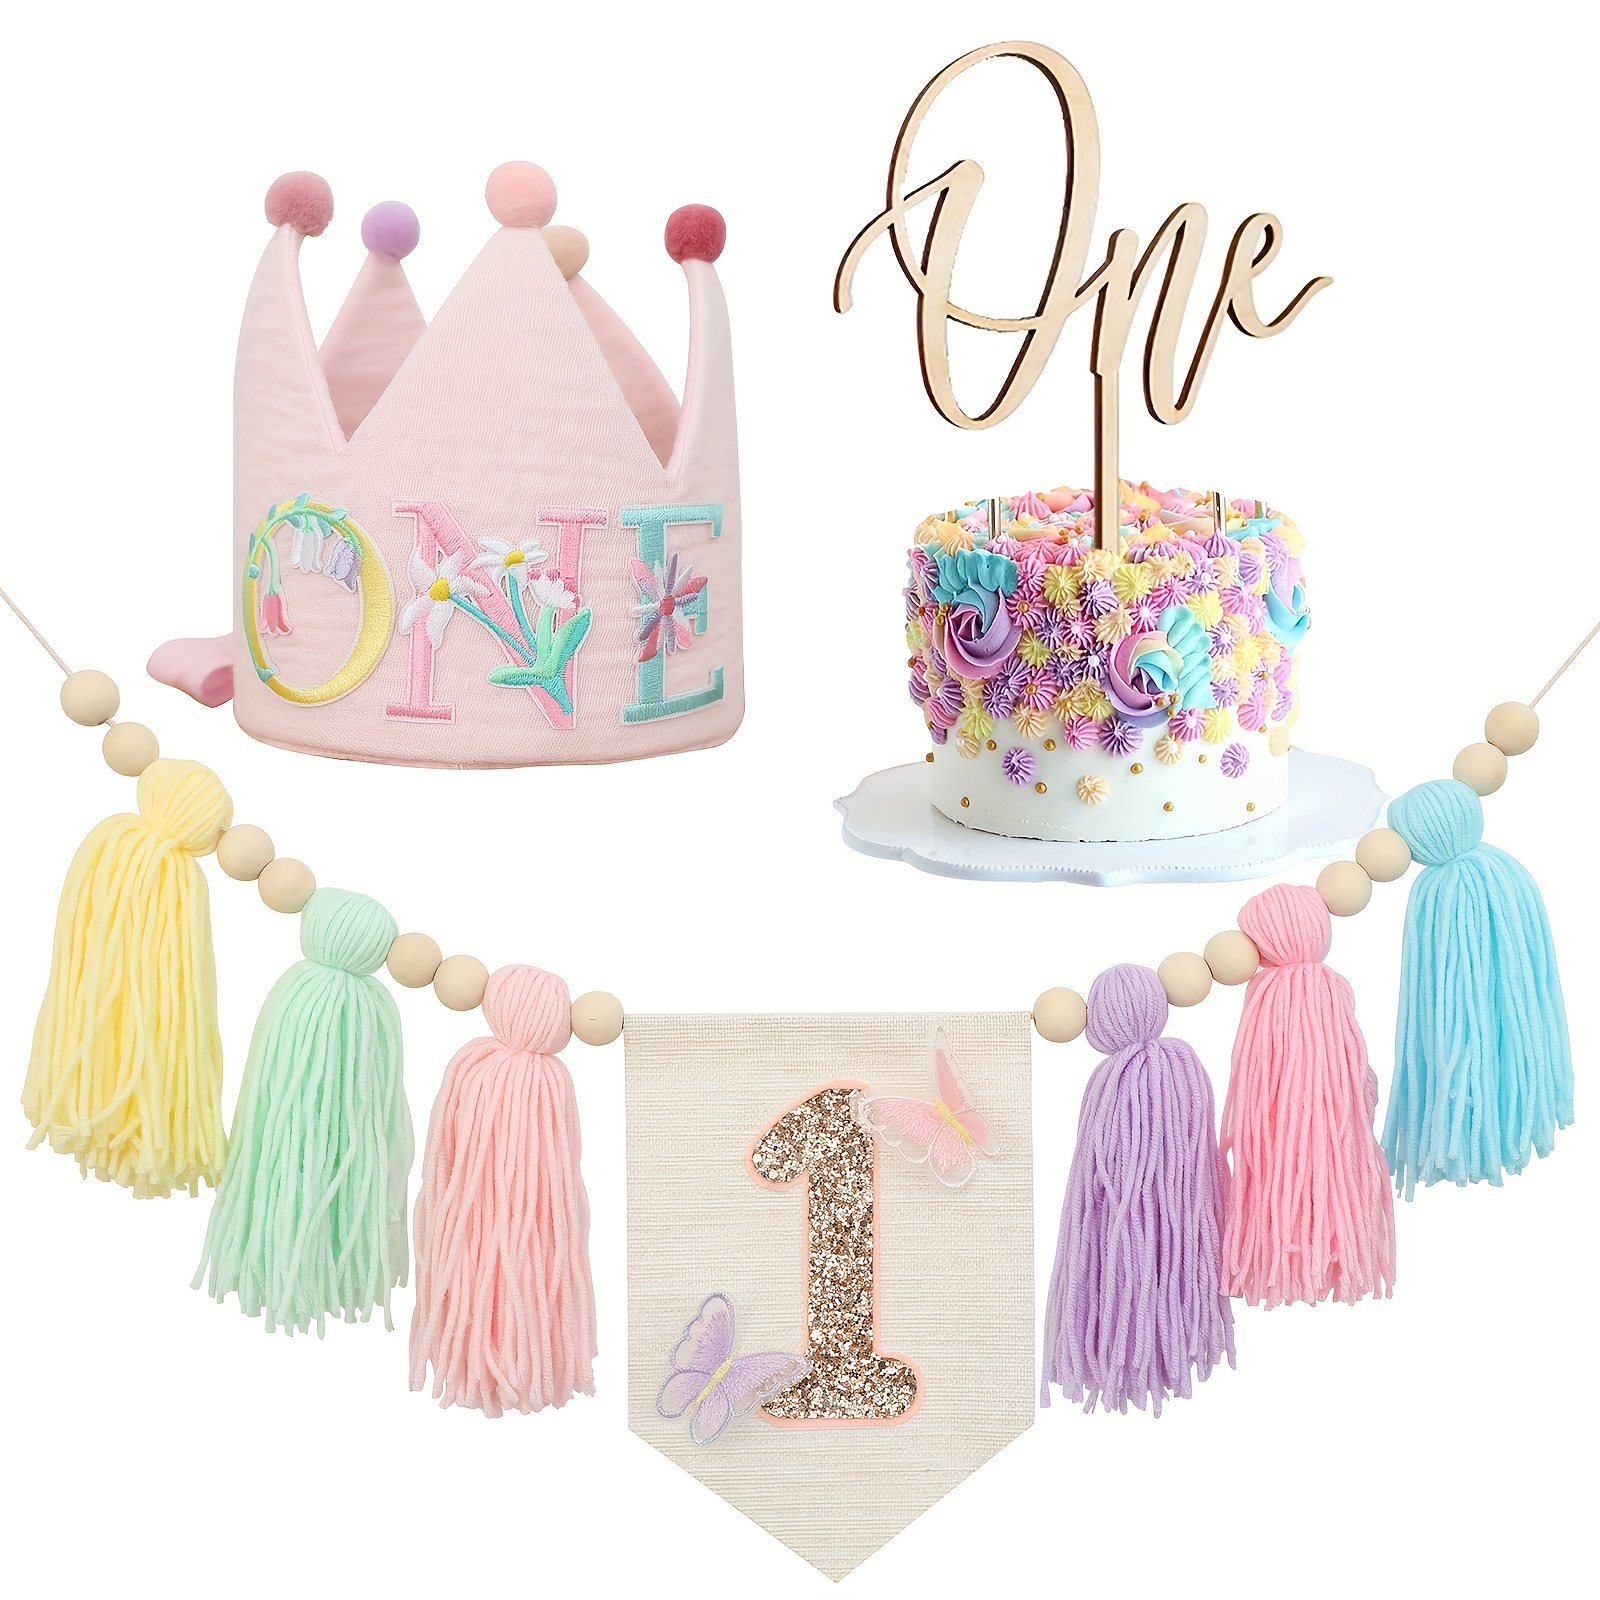 

1set, Butterfly Macaron High Chair Tassel Banner Crown Hat Cake Topper For Birthday Party Decorations, Room Decorations, Party Hair Decorations, Cake Smash Props